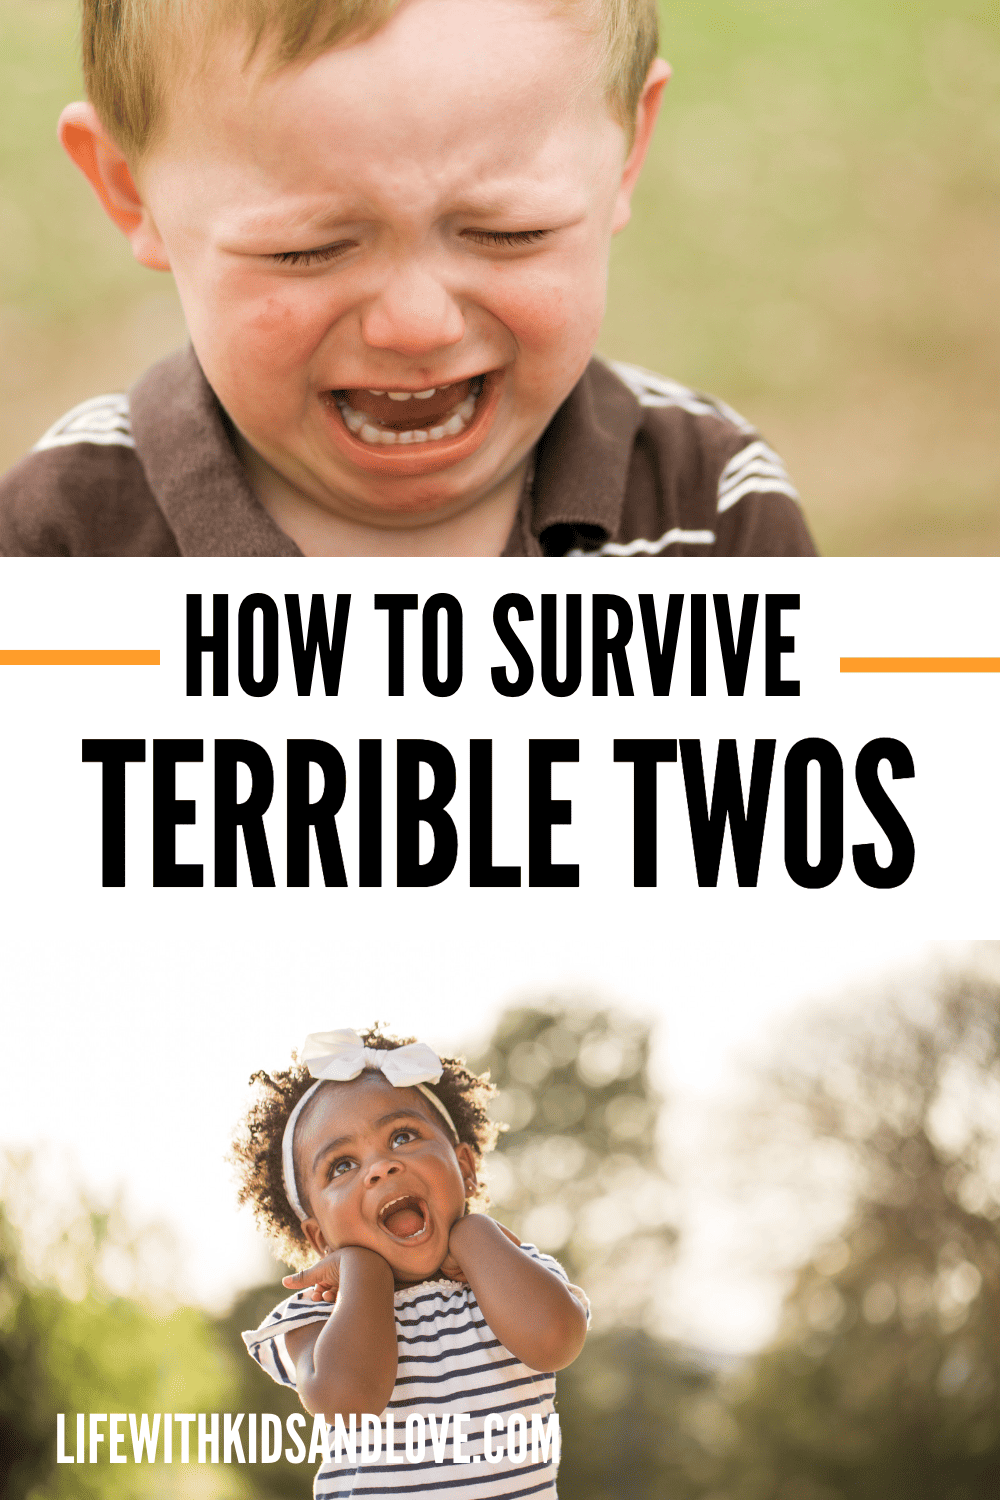 Tips on How to Survive the Terrible Twos